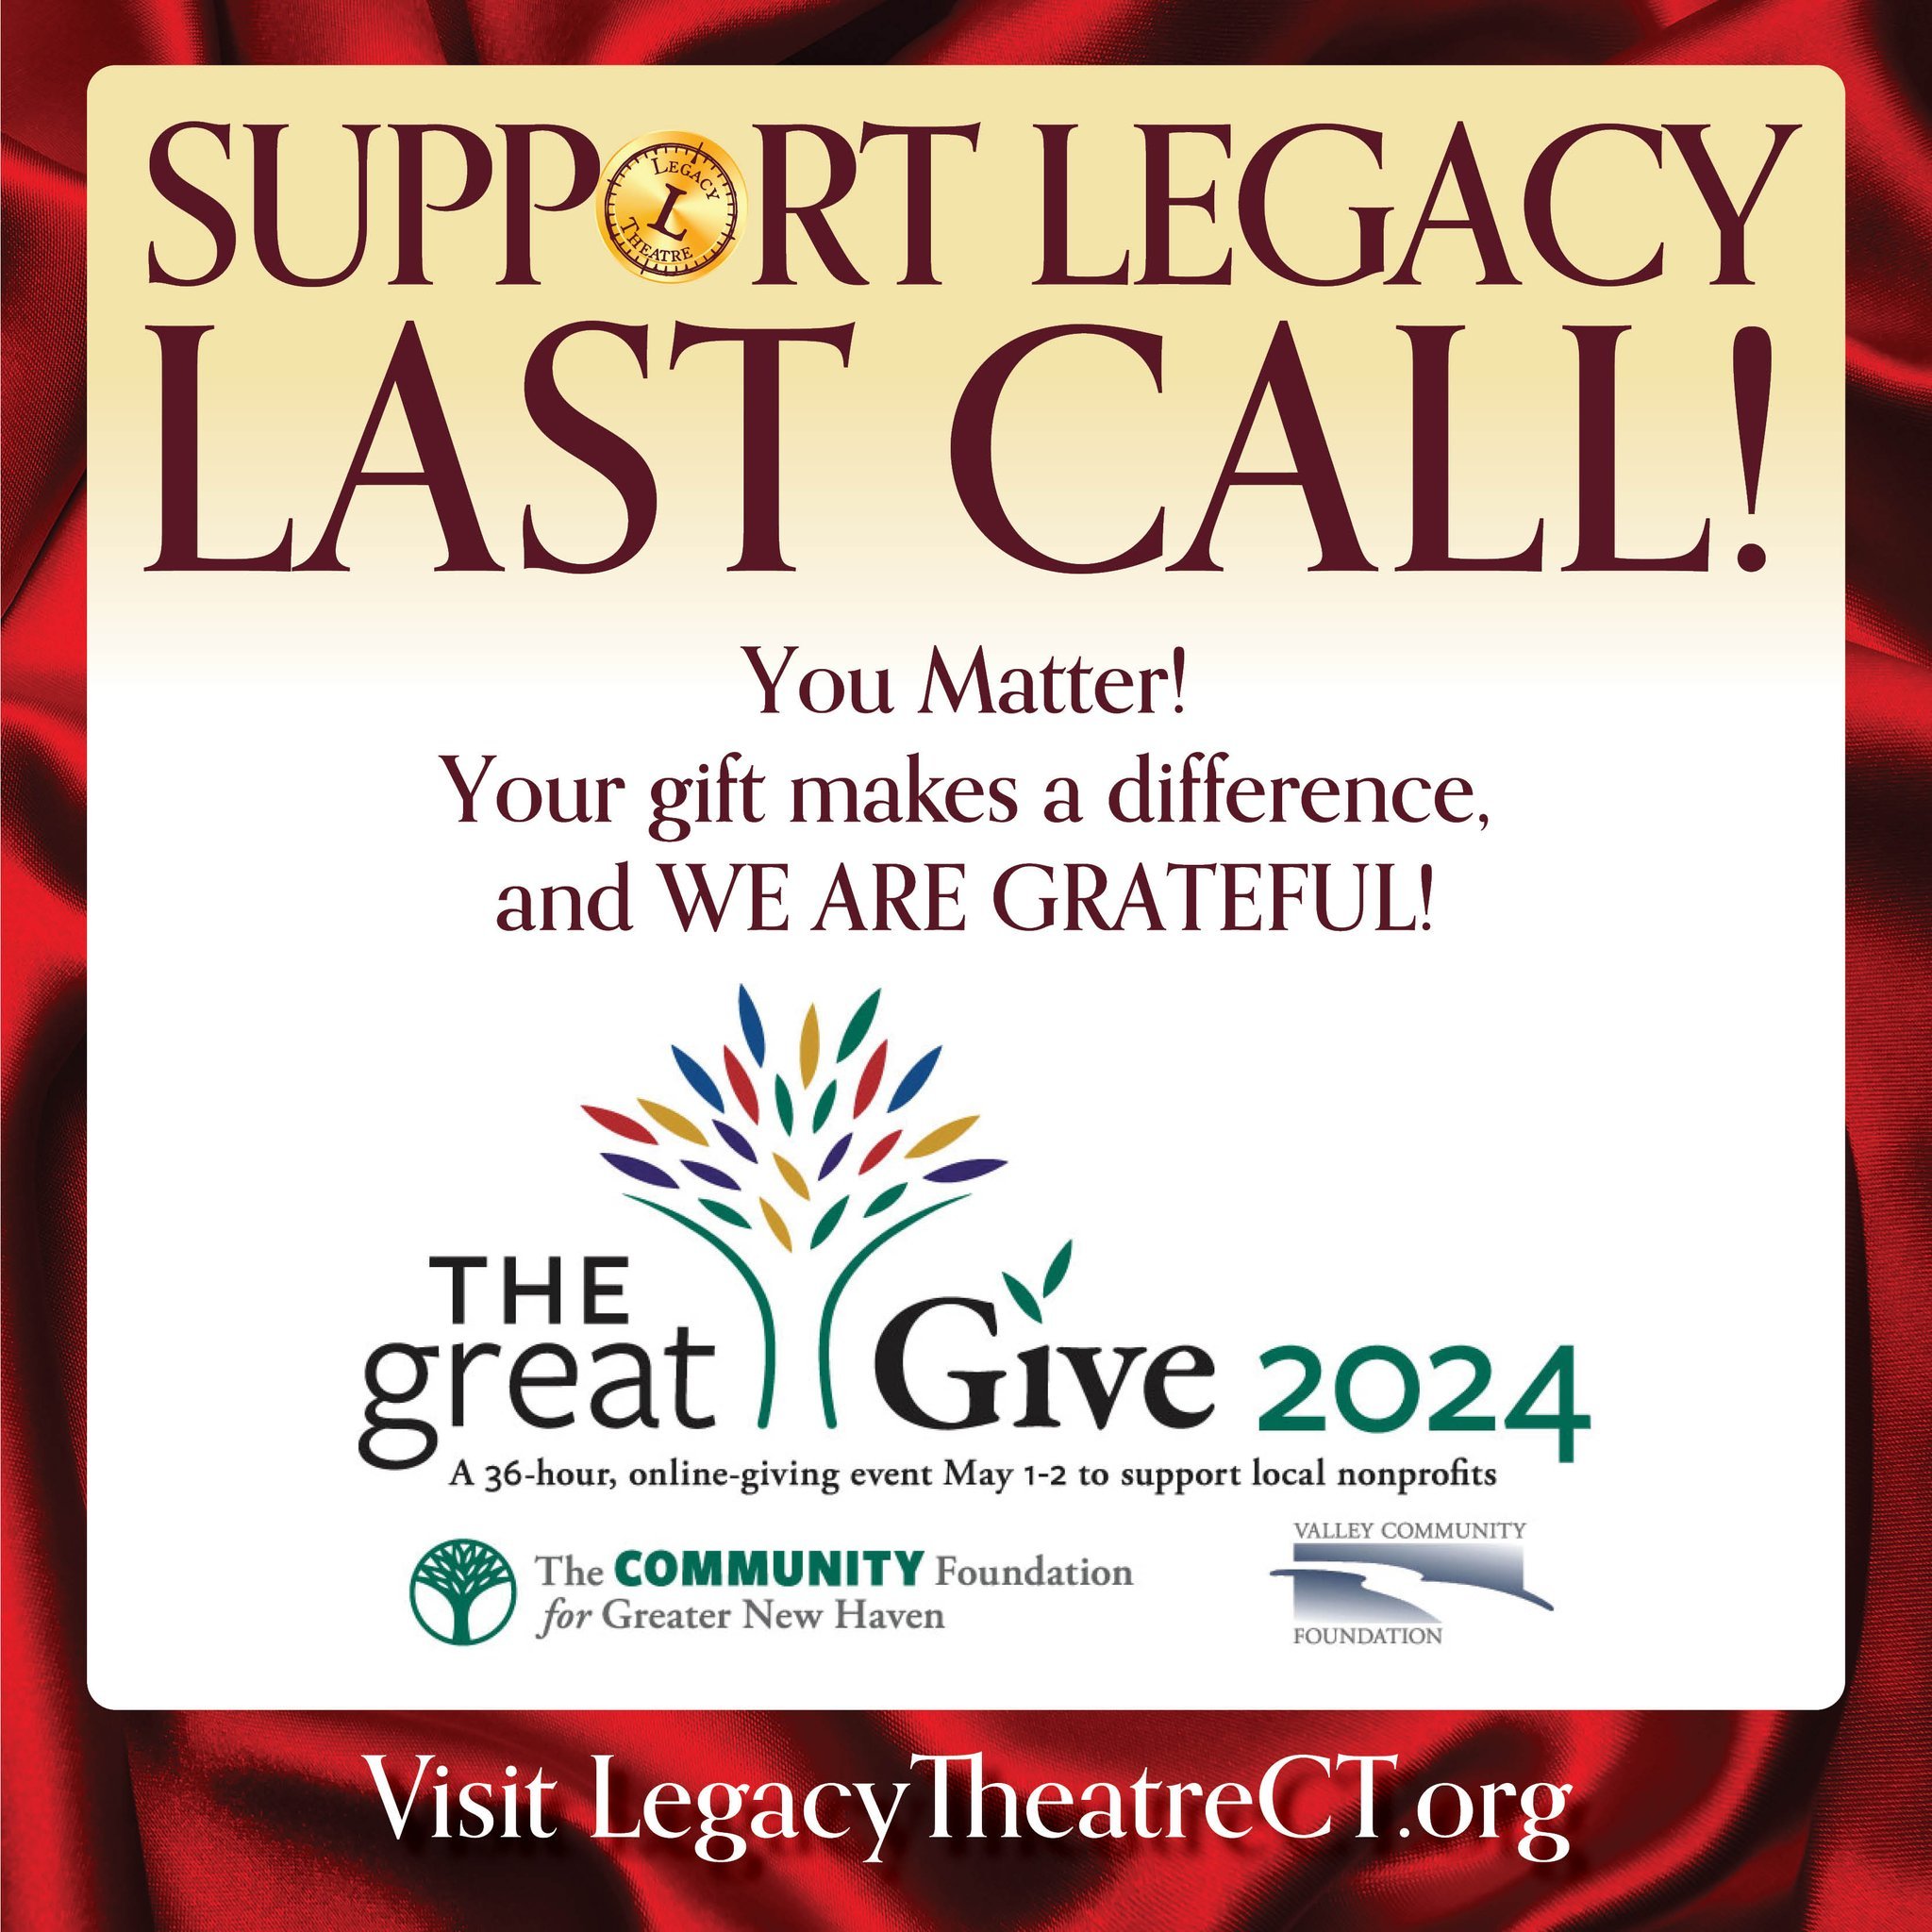 LAST CALL! Your gift to Legacy during the Great Give makes a difference, no matter how small. For just a $5 minimum donation, you can make a difference for the arts in your community. Make a gift to Legacy Theatre via The Great Give by 8pm! 

legacyt